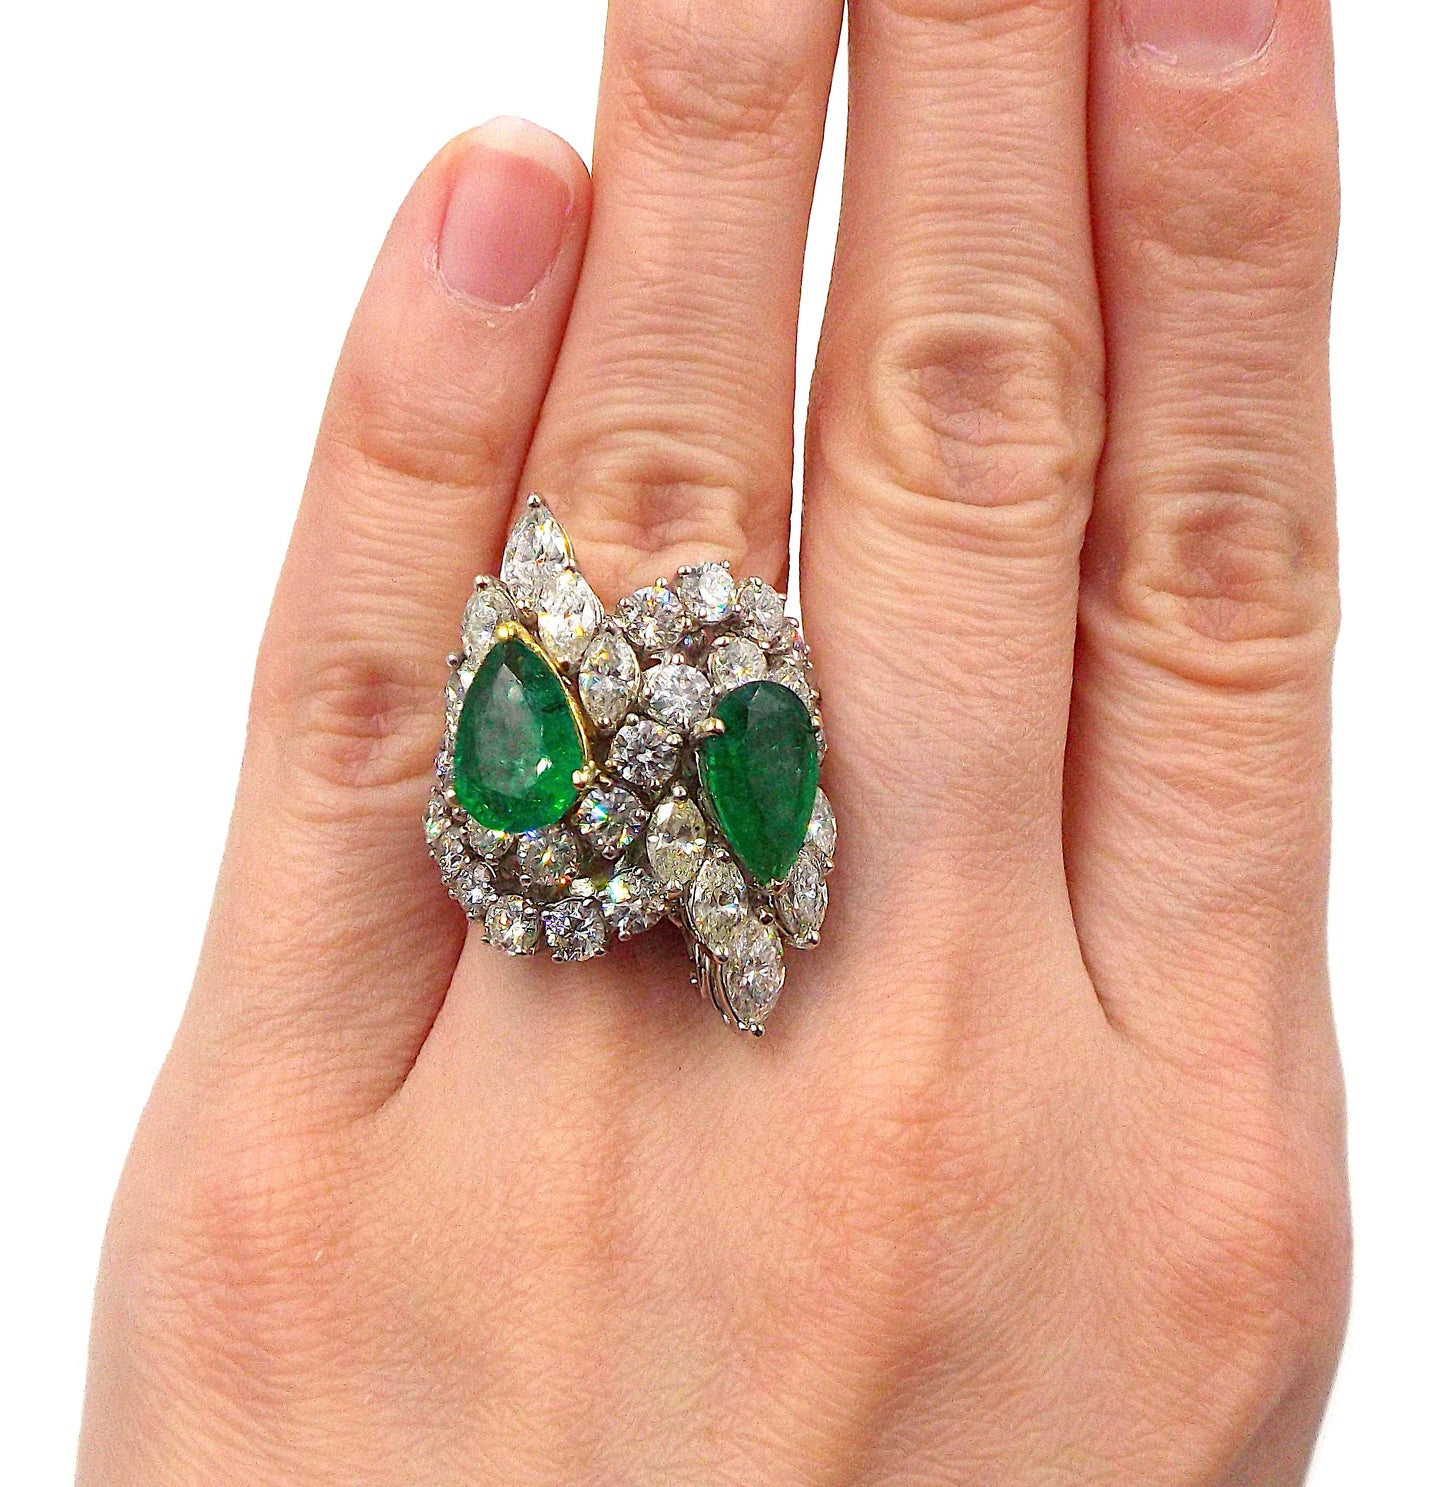 White Gold, Emerald and Diamond Ring